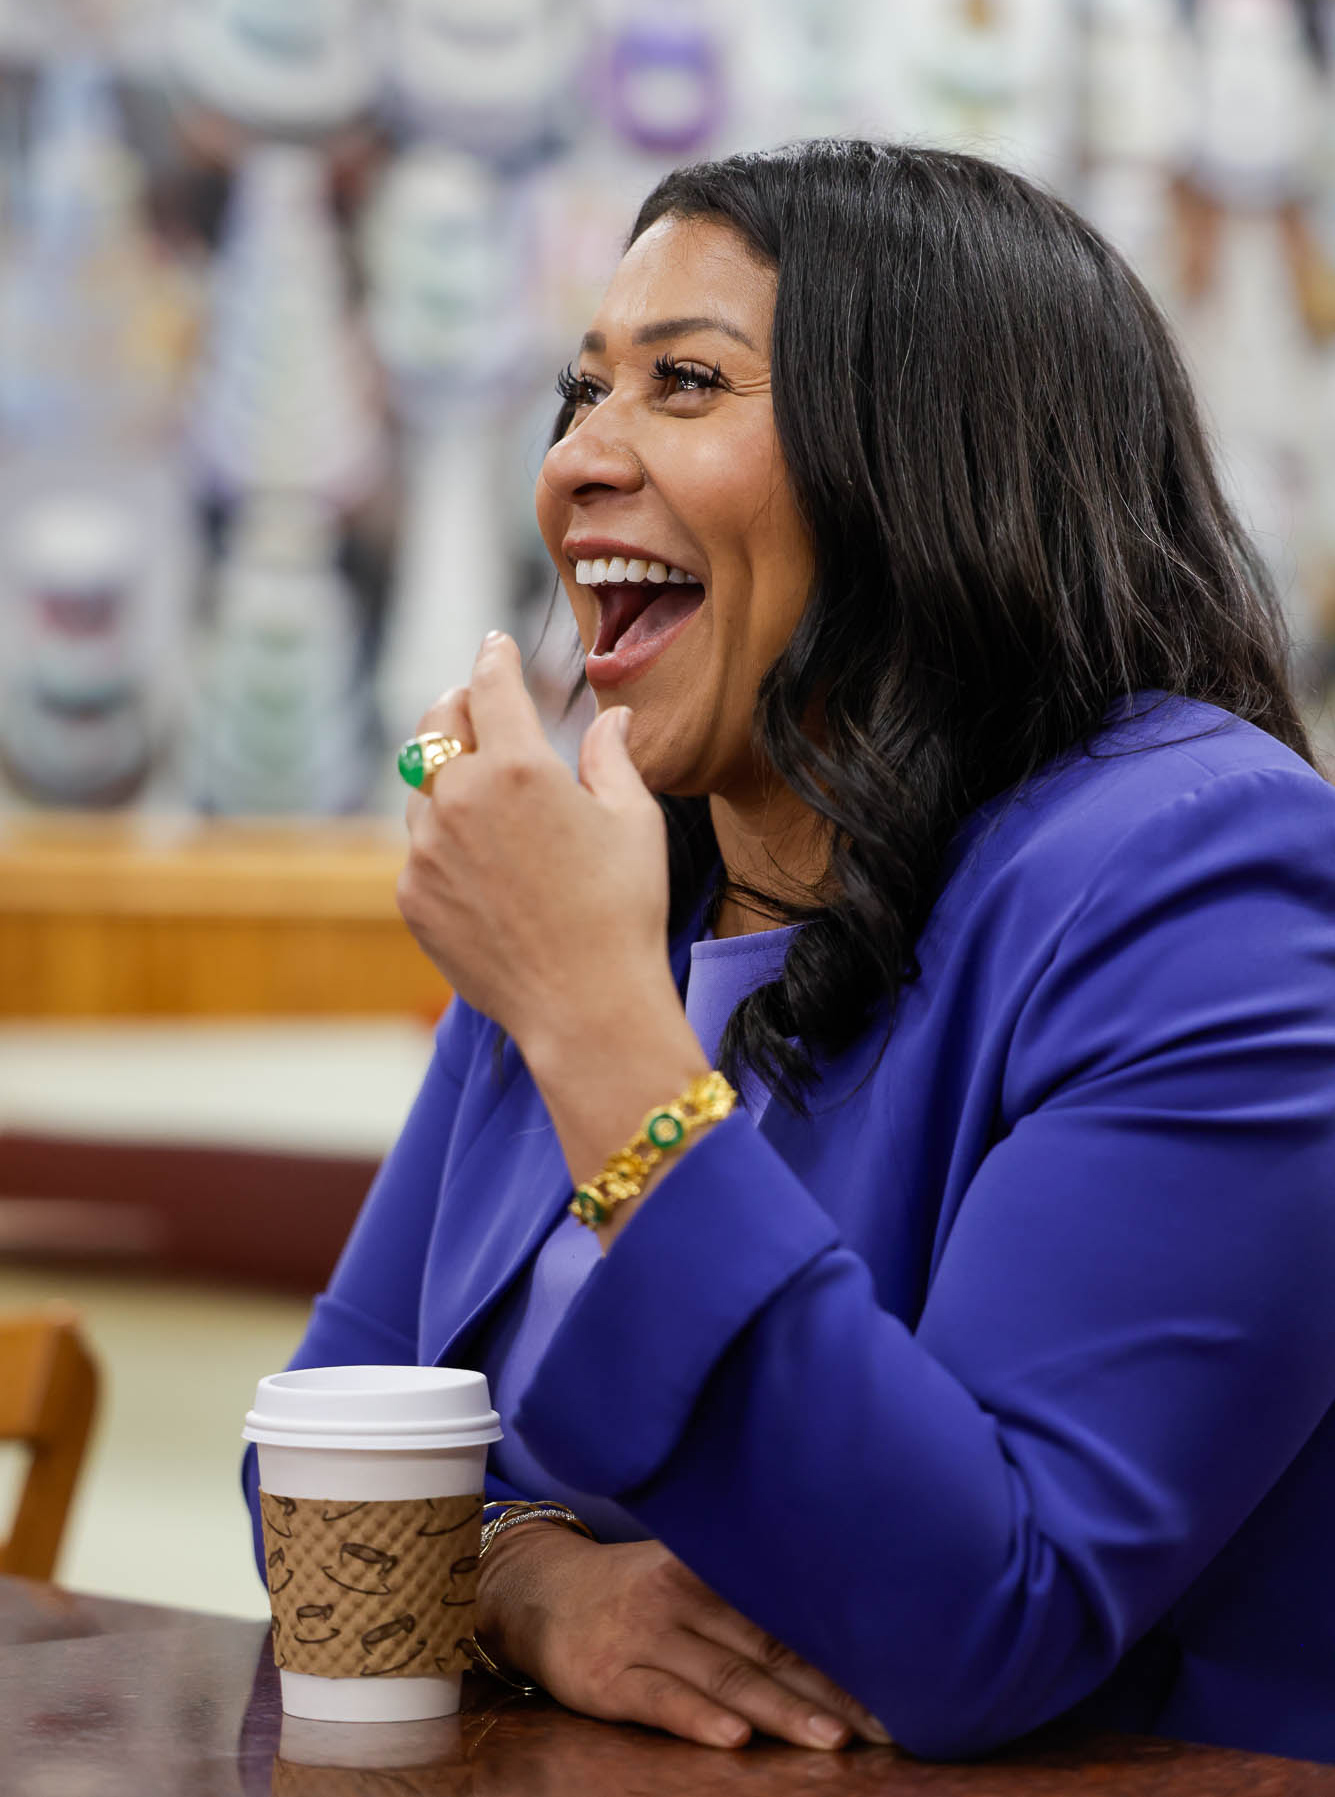 A woman in a blue blazer is laughing, with a coffee cup on the table. She's wearing jewelry.